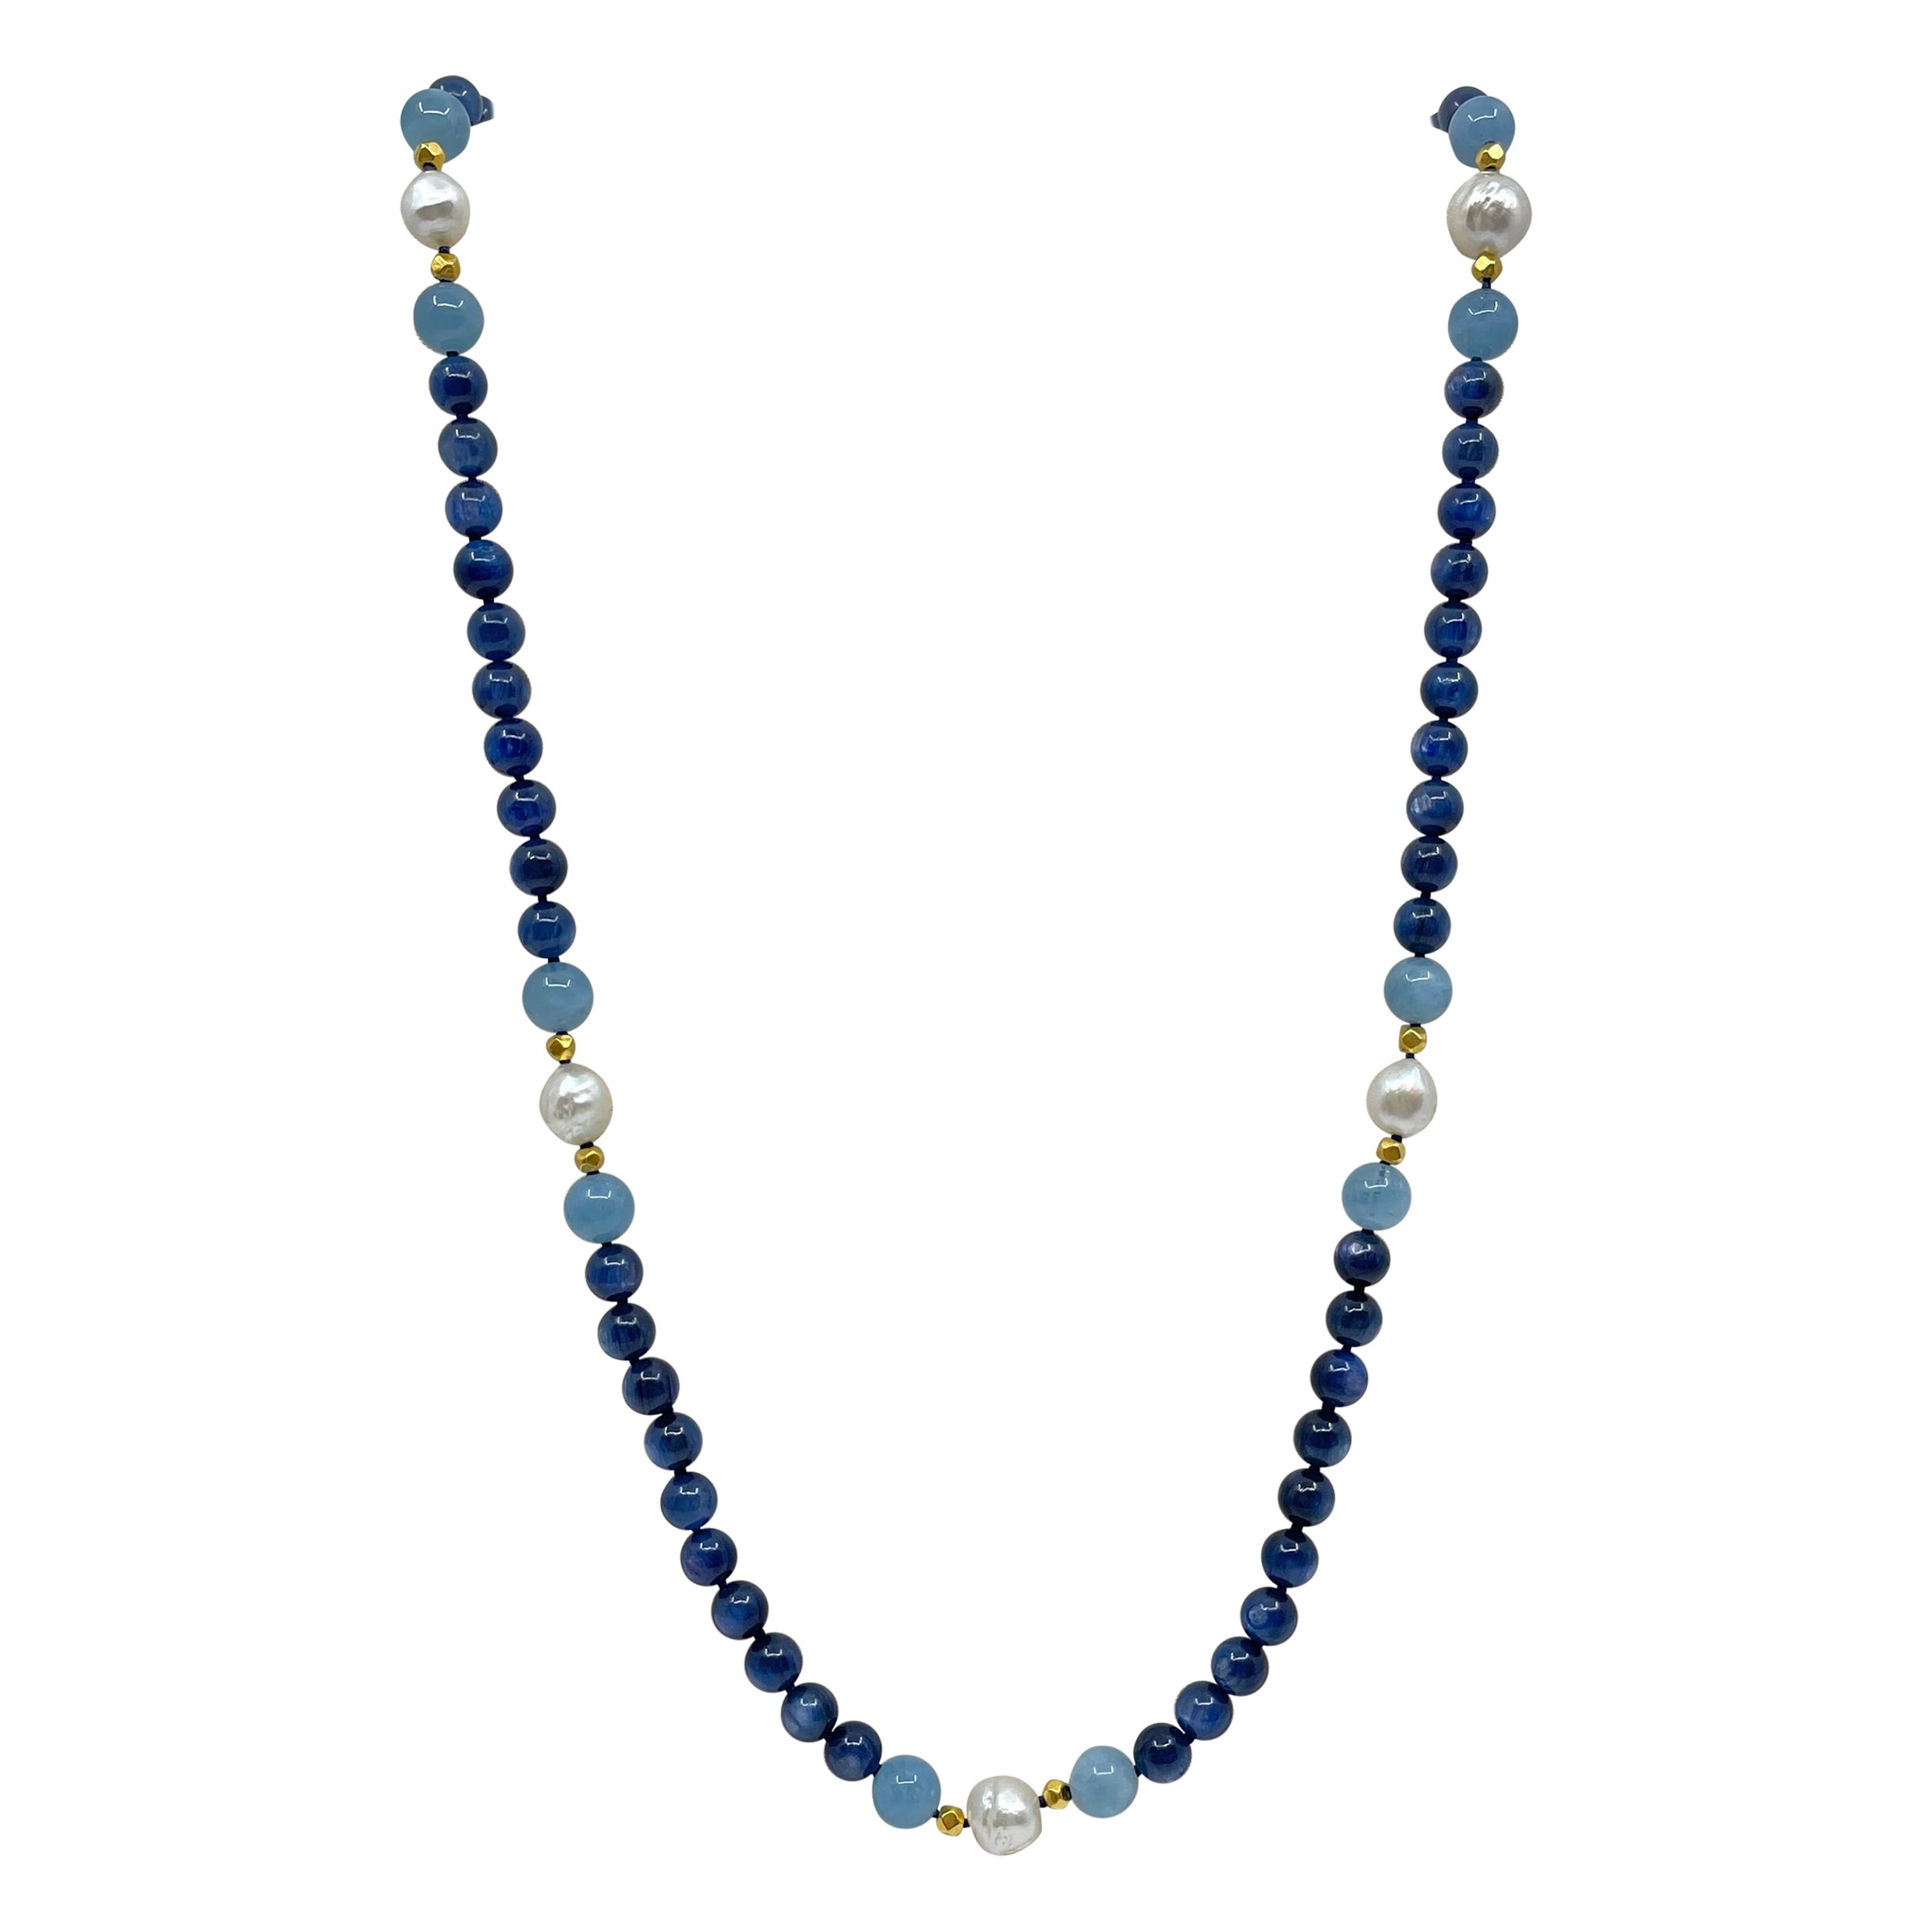 Long Necklace with Kyanite, Aquamarine, South Sea Pearls & 18K Solid Gold Beads For Sale